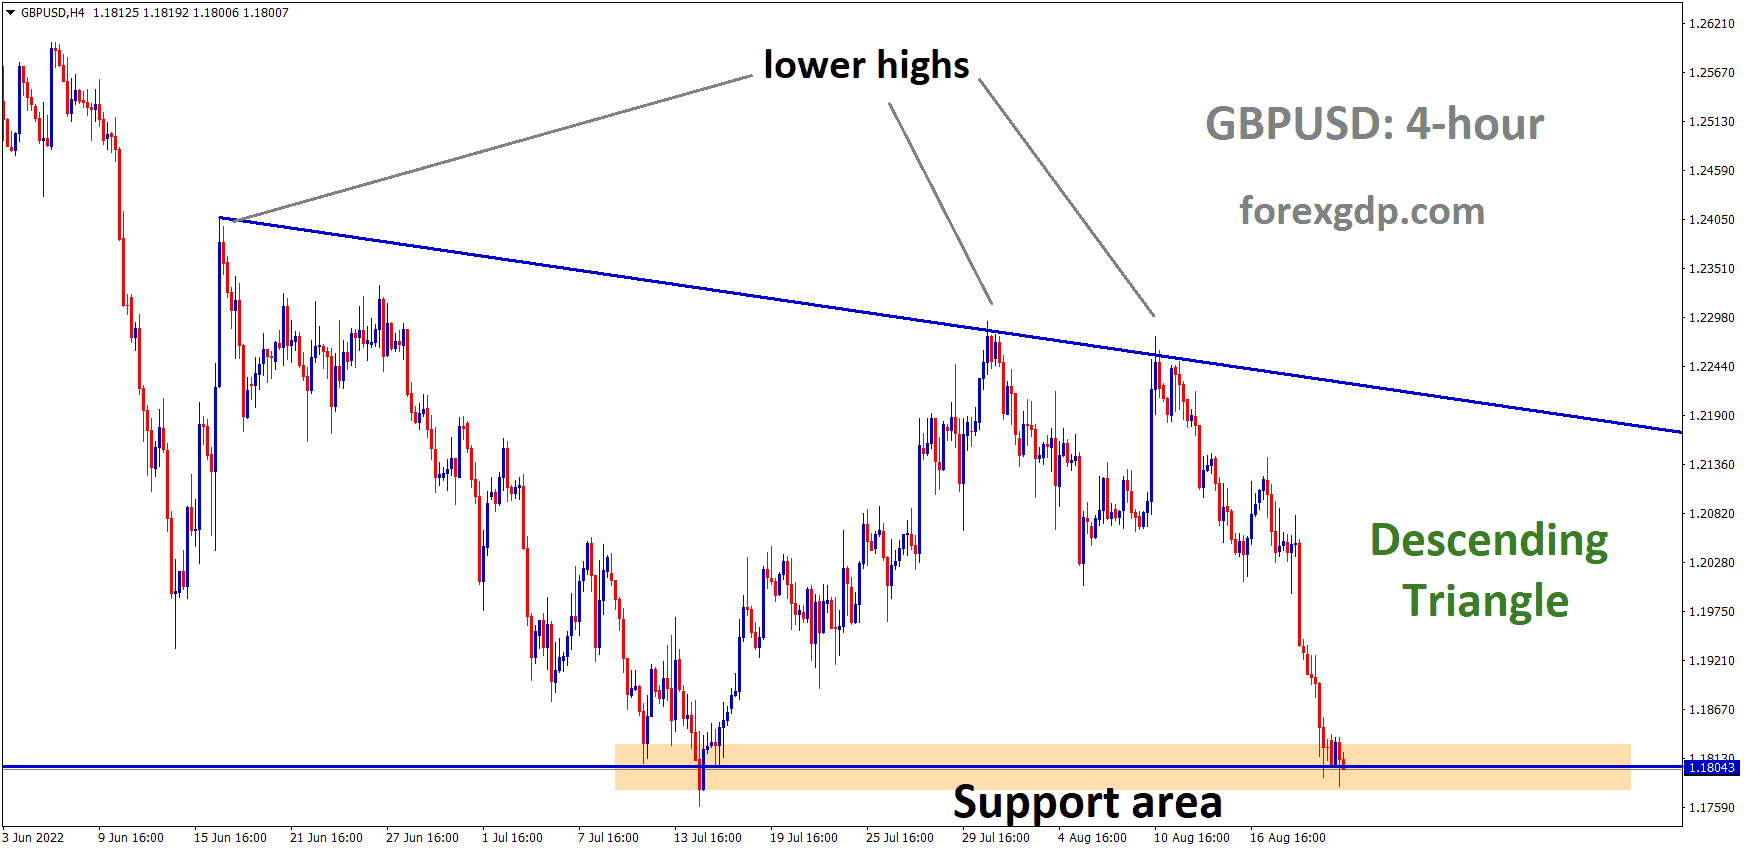 GBPUSD is moving in the Descending triangle pattern and the Market has reached the Horizontal support area of the Pattern.